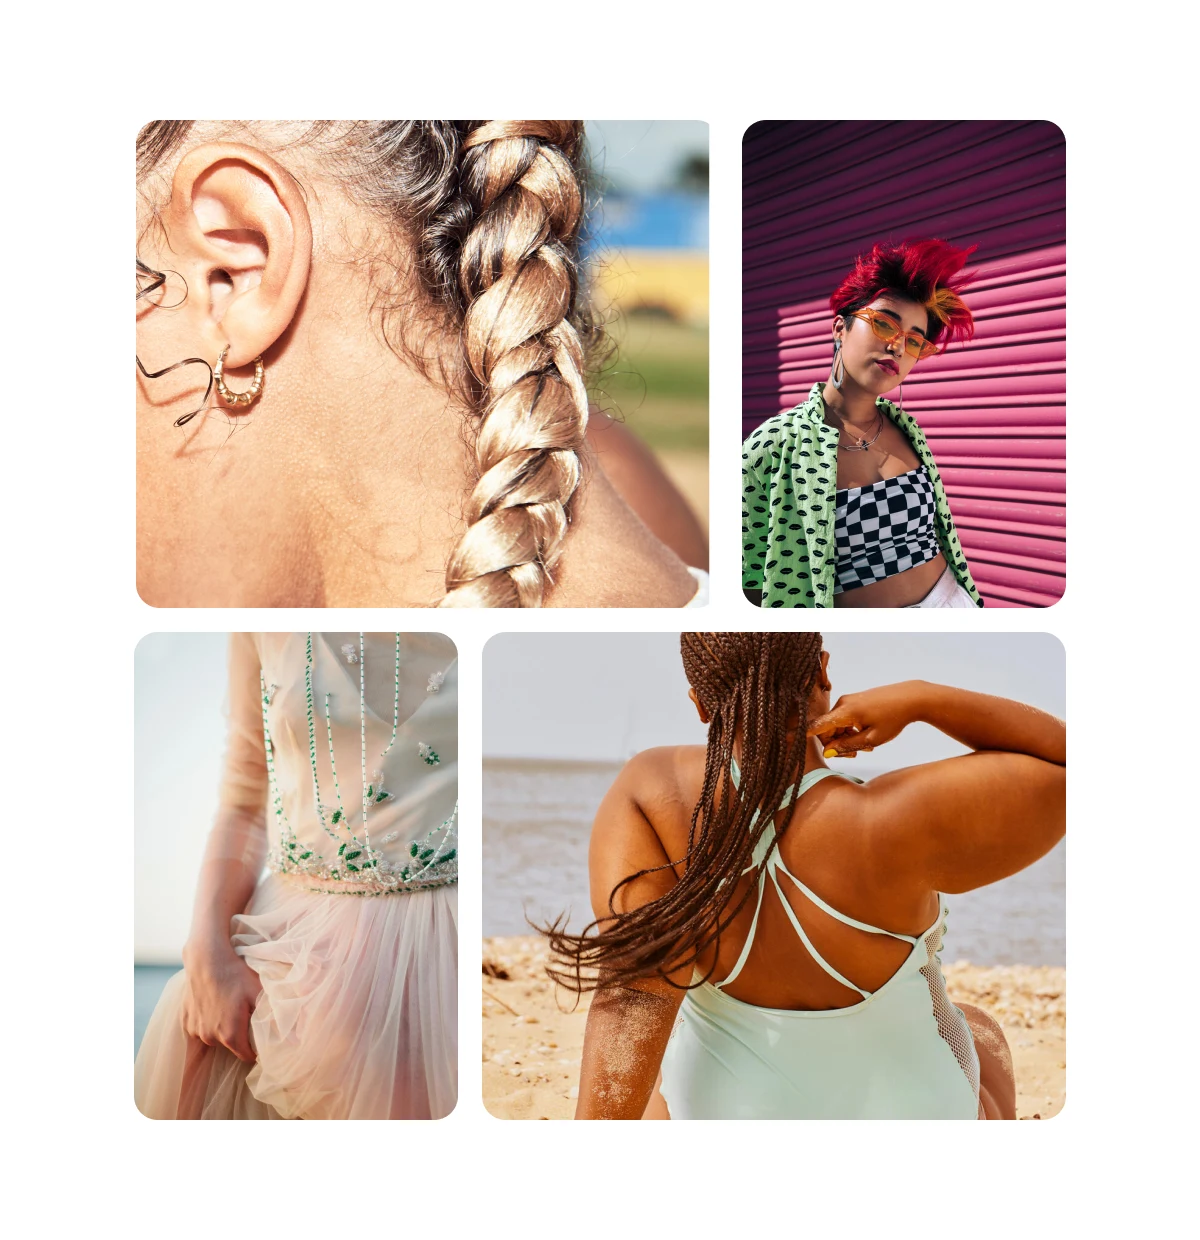  Pin grid featuring bleach blonde braid, person with eclectic fashion, fairly princess dress, and a Black woman with braids on the beach.